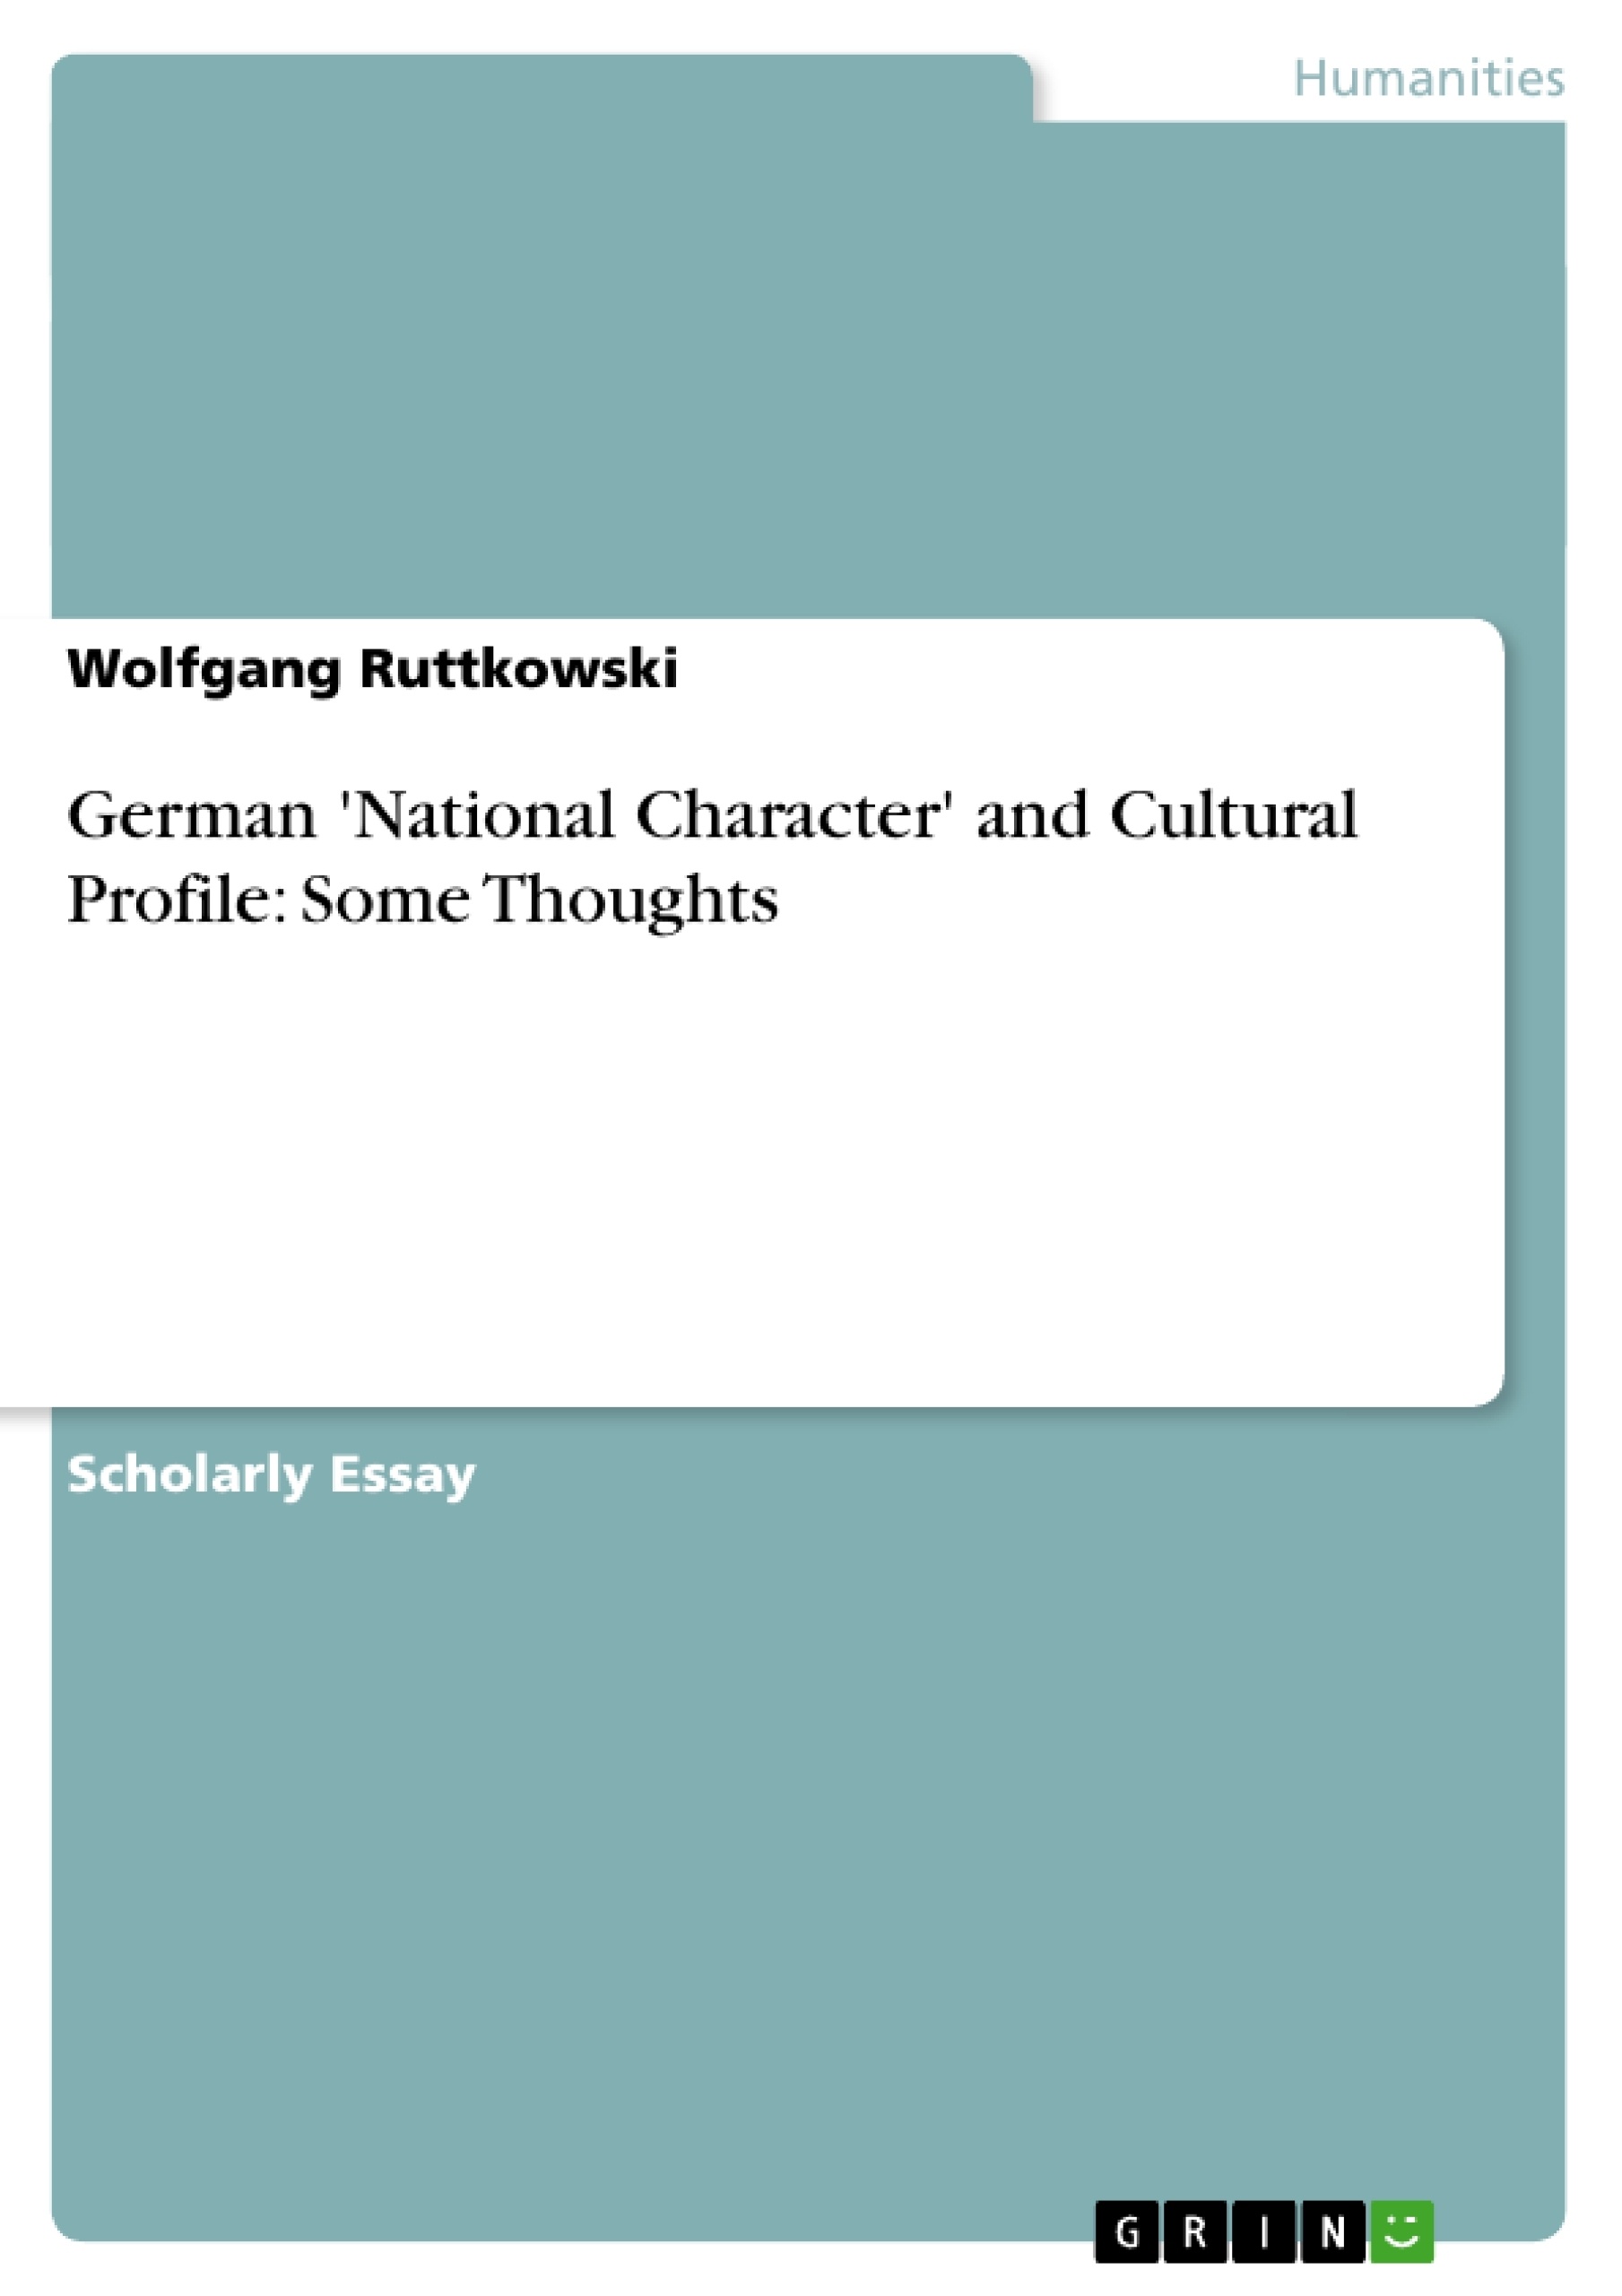 Título: German 'National Character' and Cultural Profile: Some Thoughts